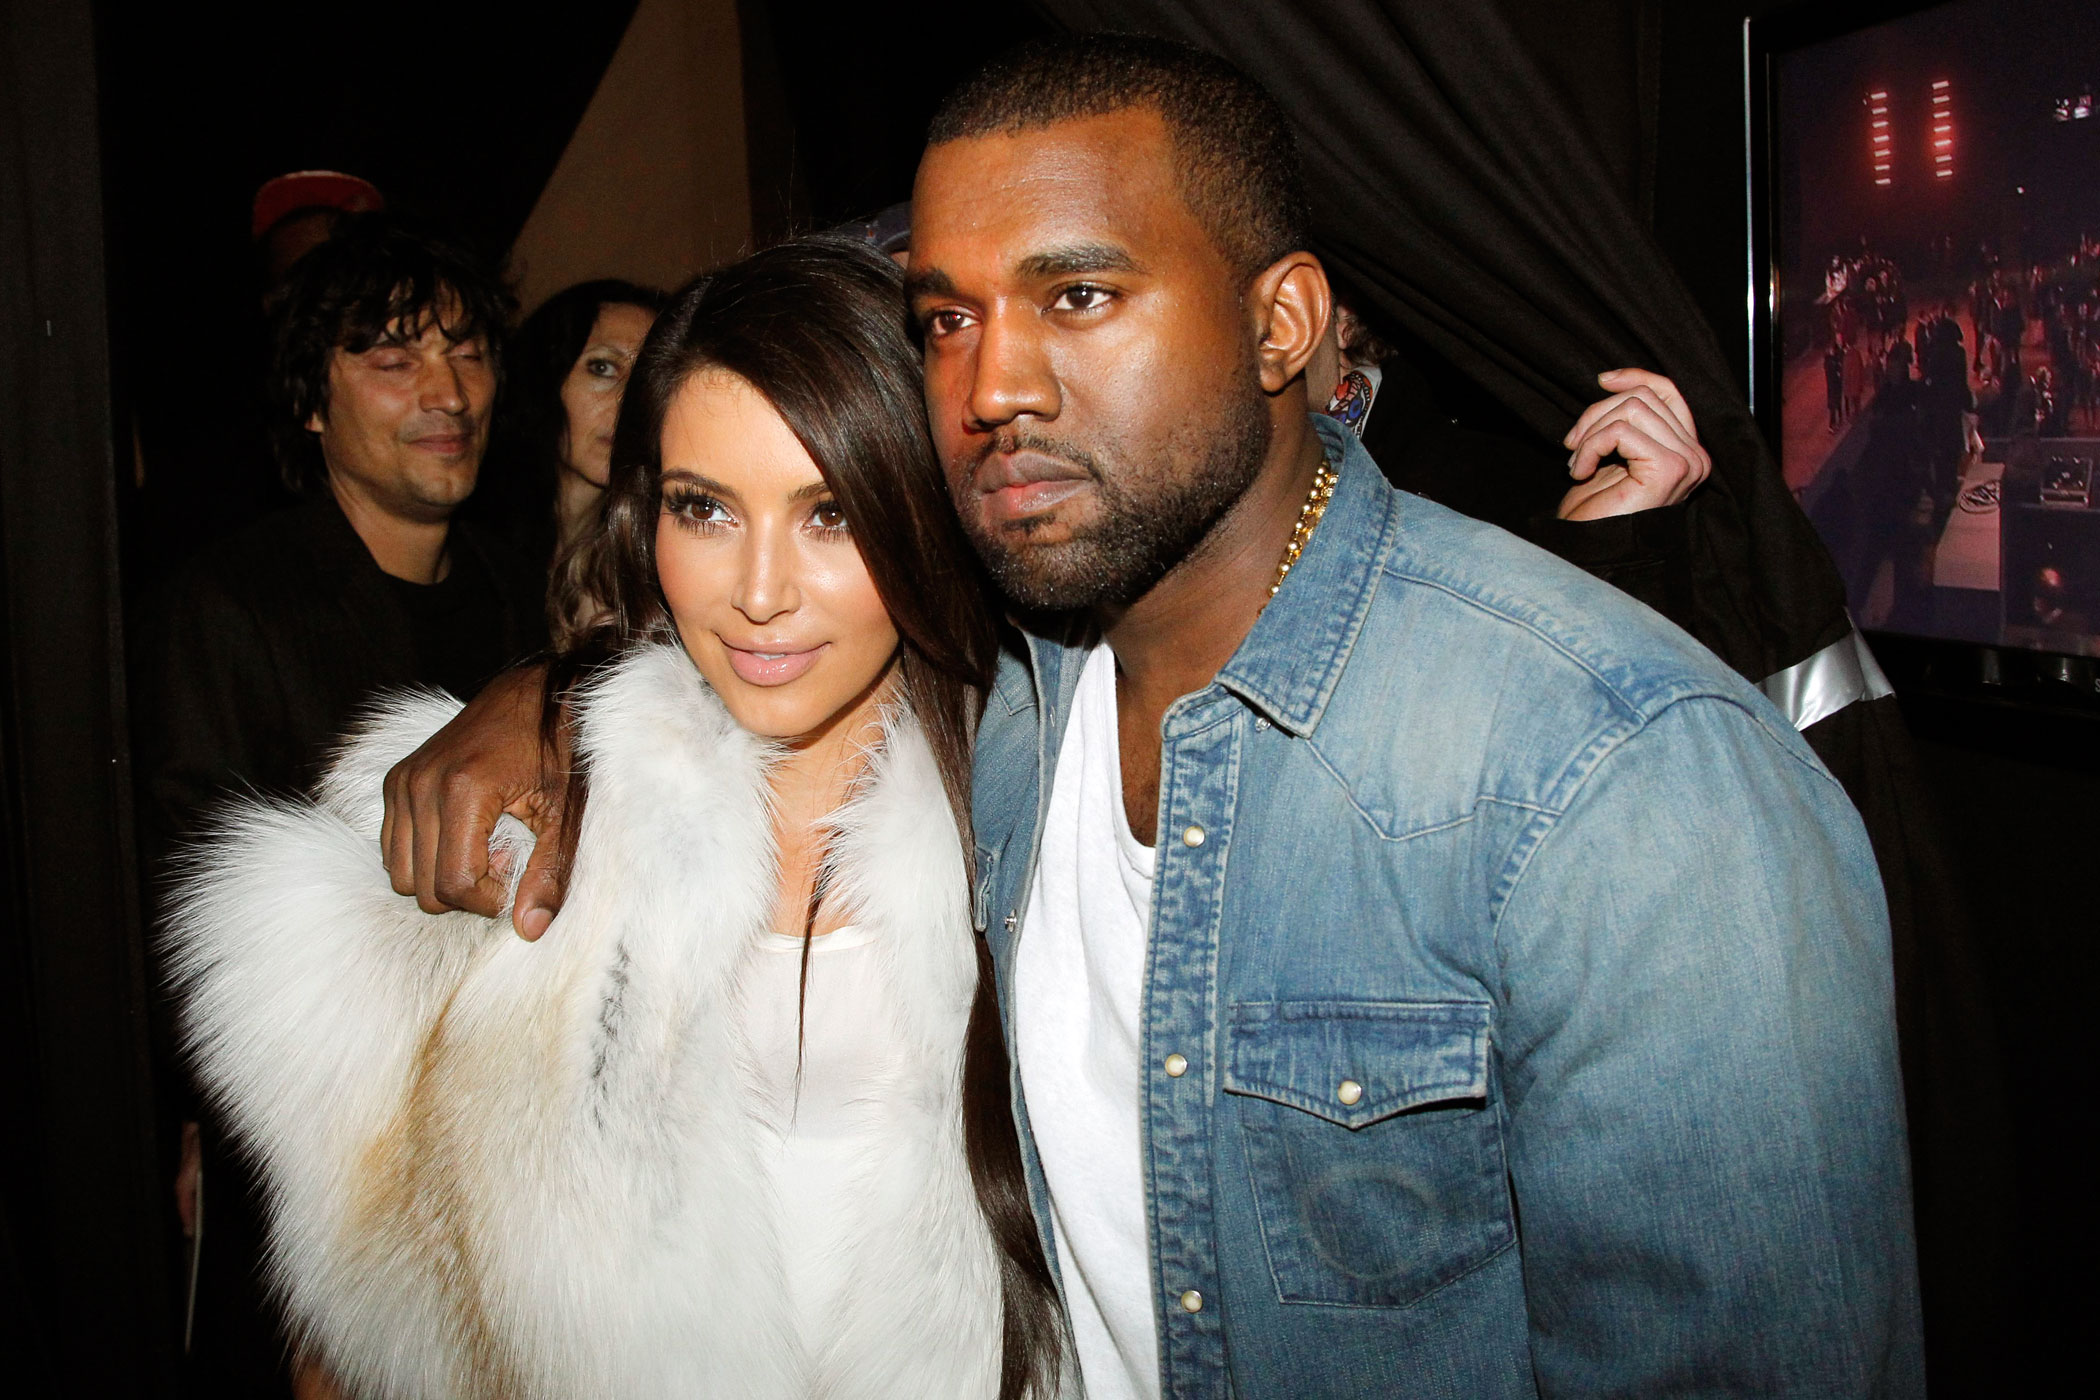 Kim Kardashian and Kanye West have publicly supported Hillary Clinton.